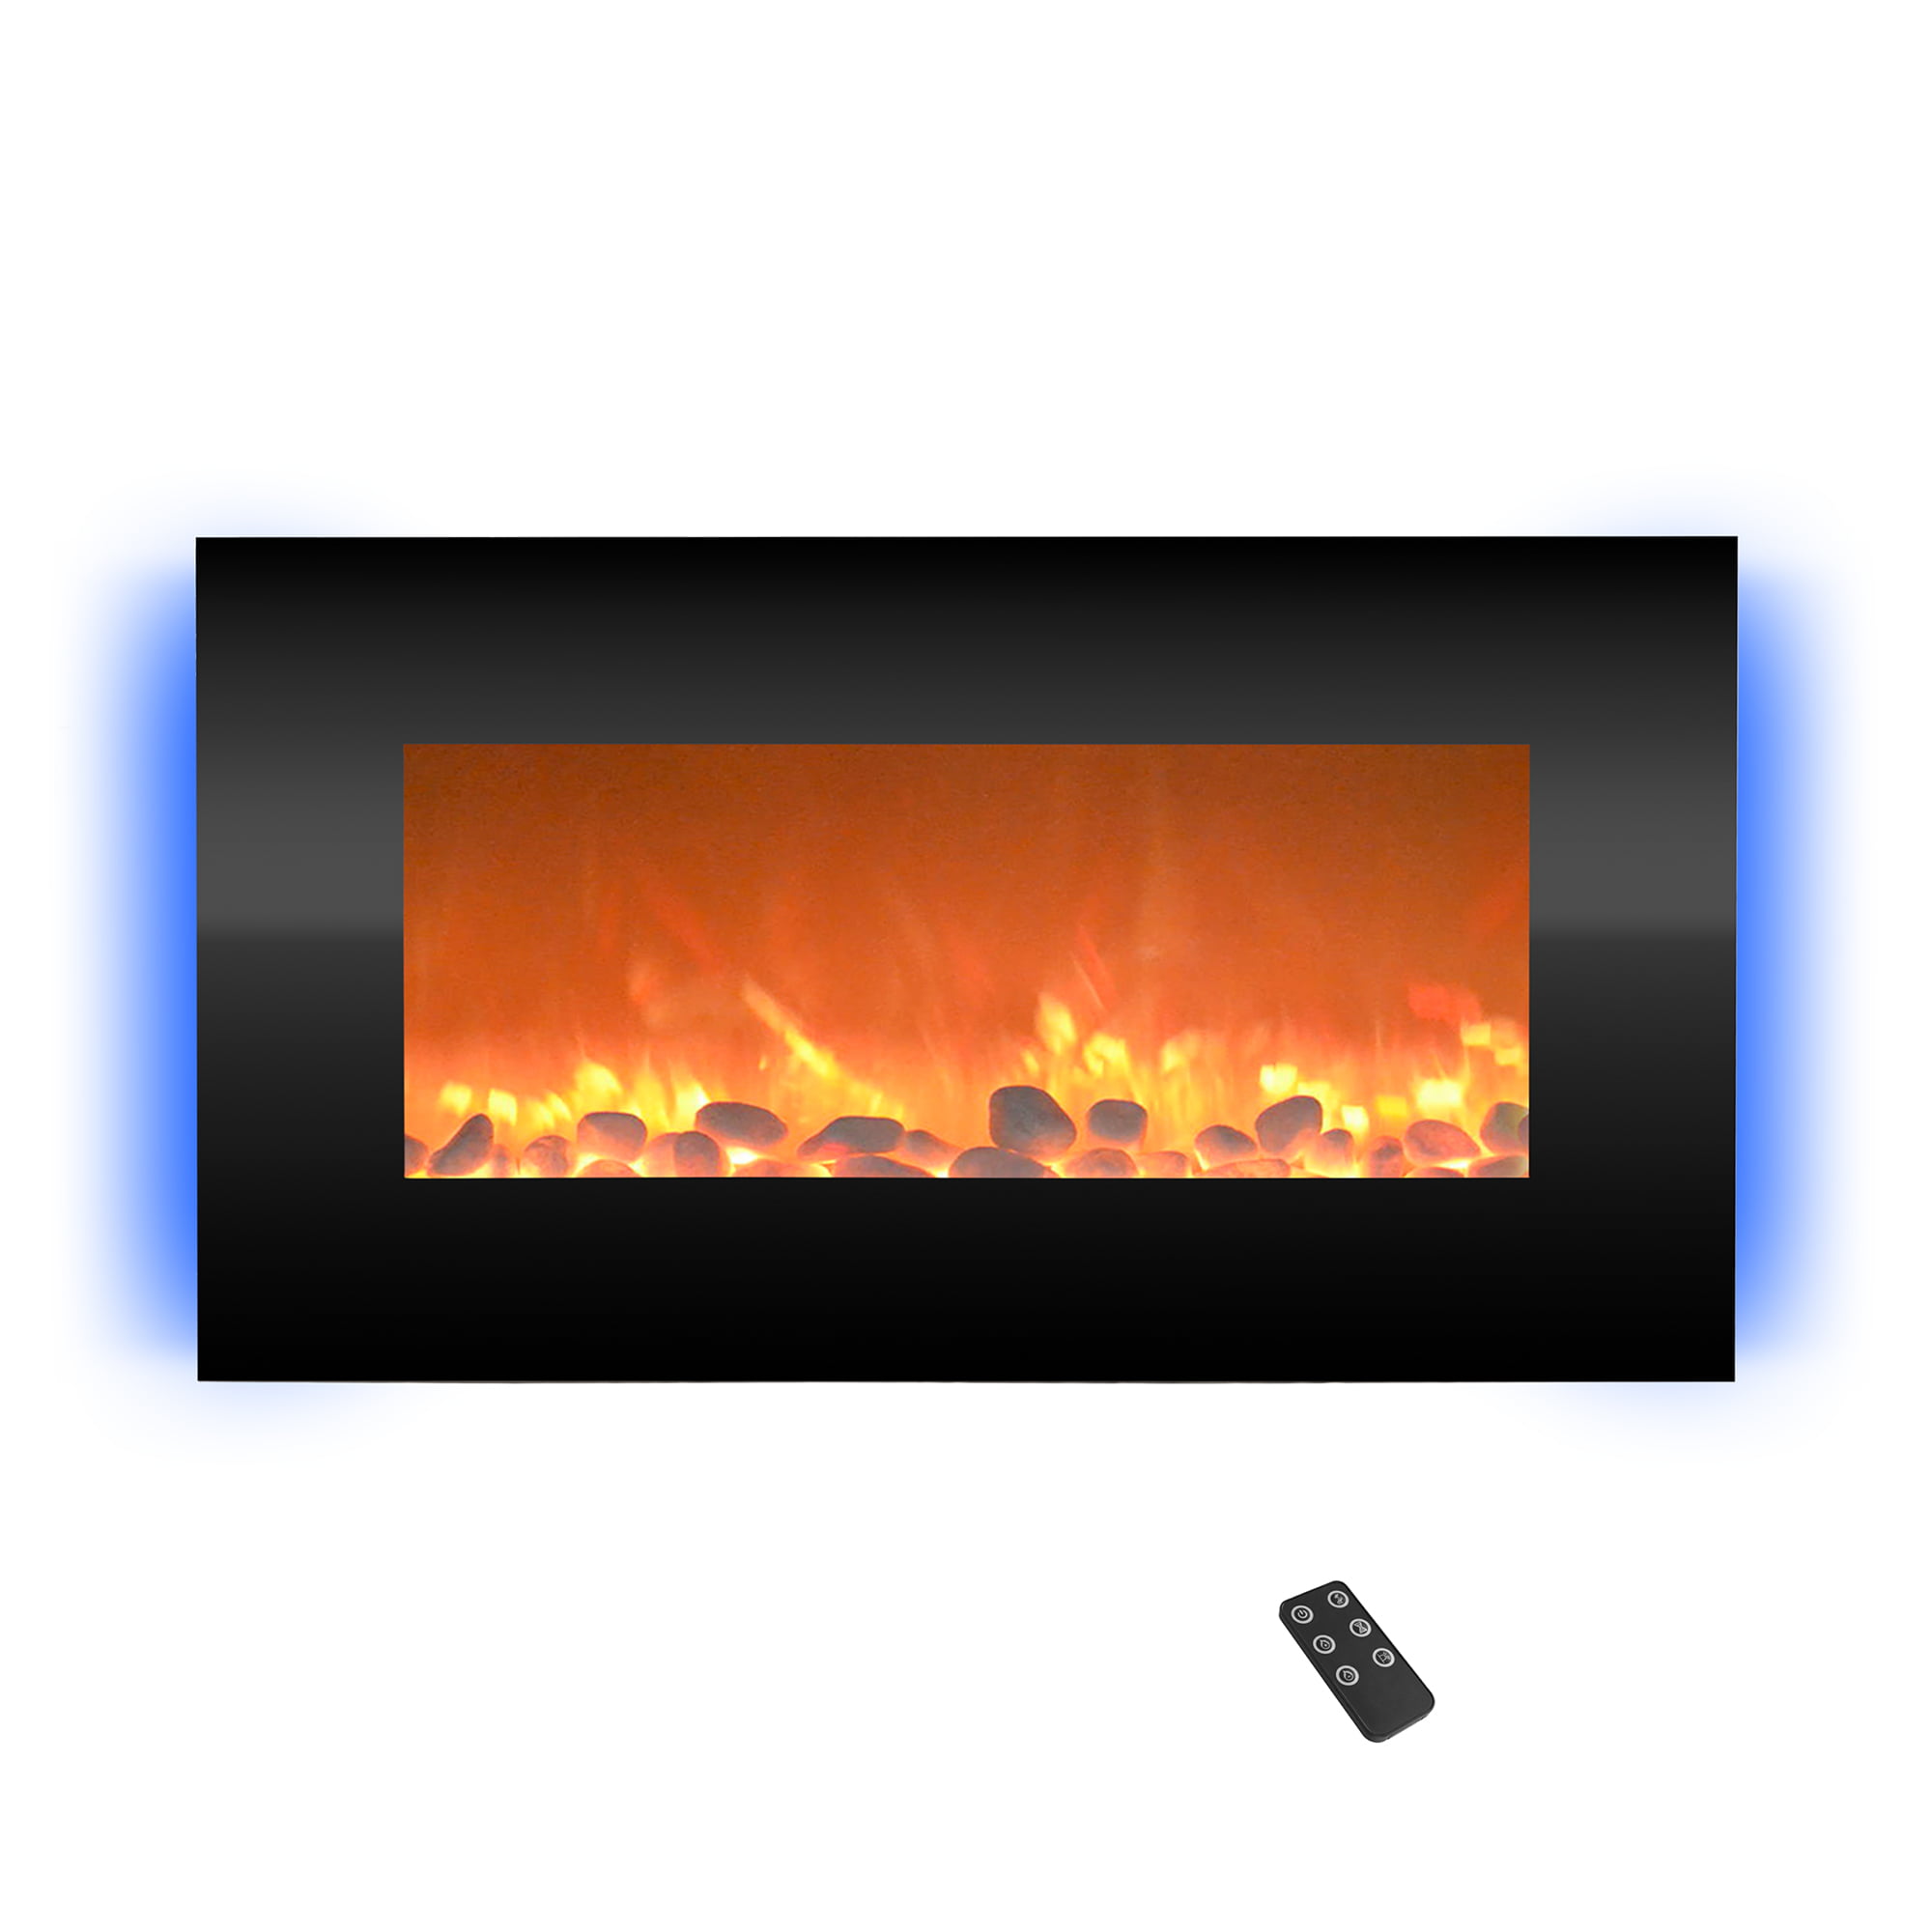 30" 1500W Northwest Electric Fireplace w/ Remote Control & Adjustable Heat (Black) $129 + Free Shipping